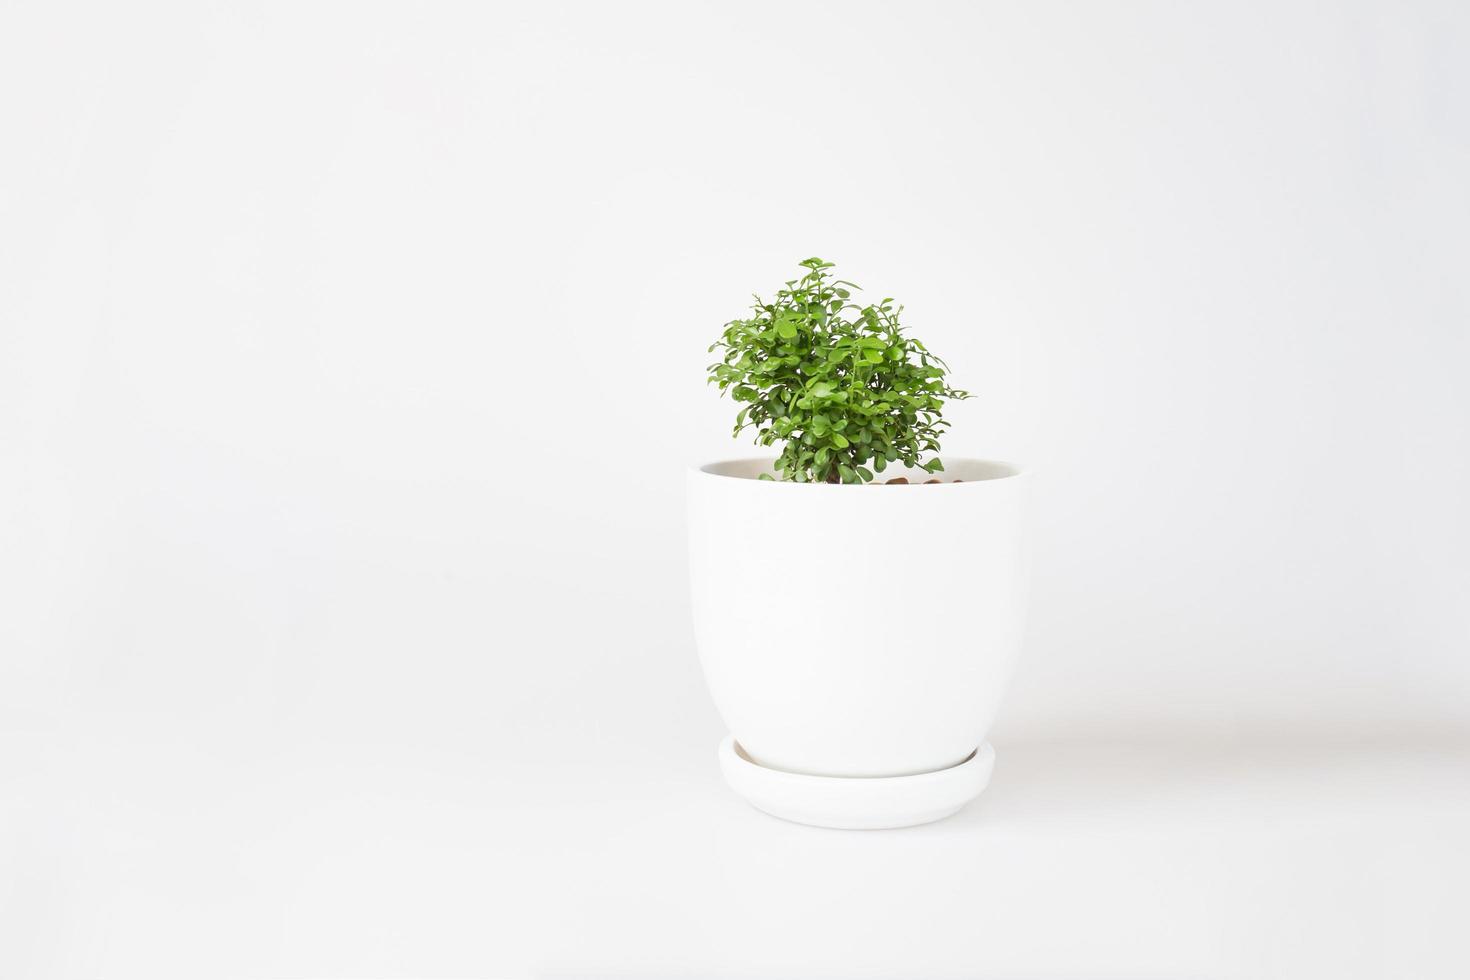 Miniature plants on white background. Small tree in white pot, Garden in tray. photo